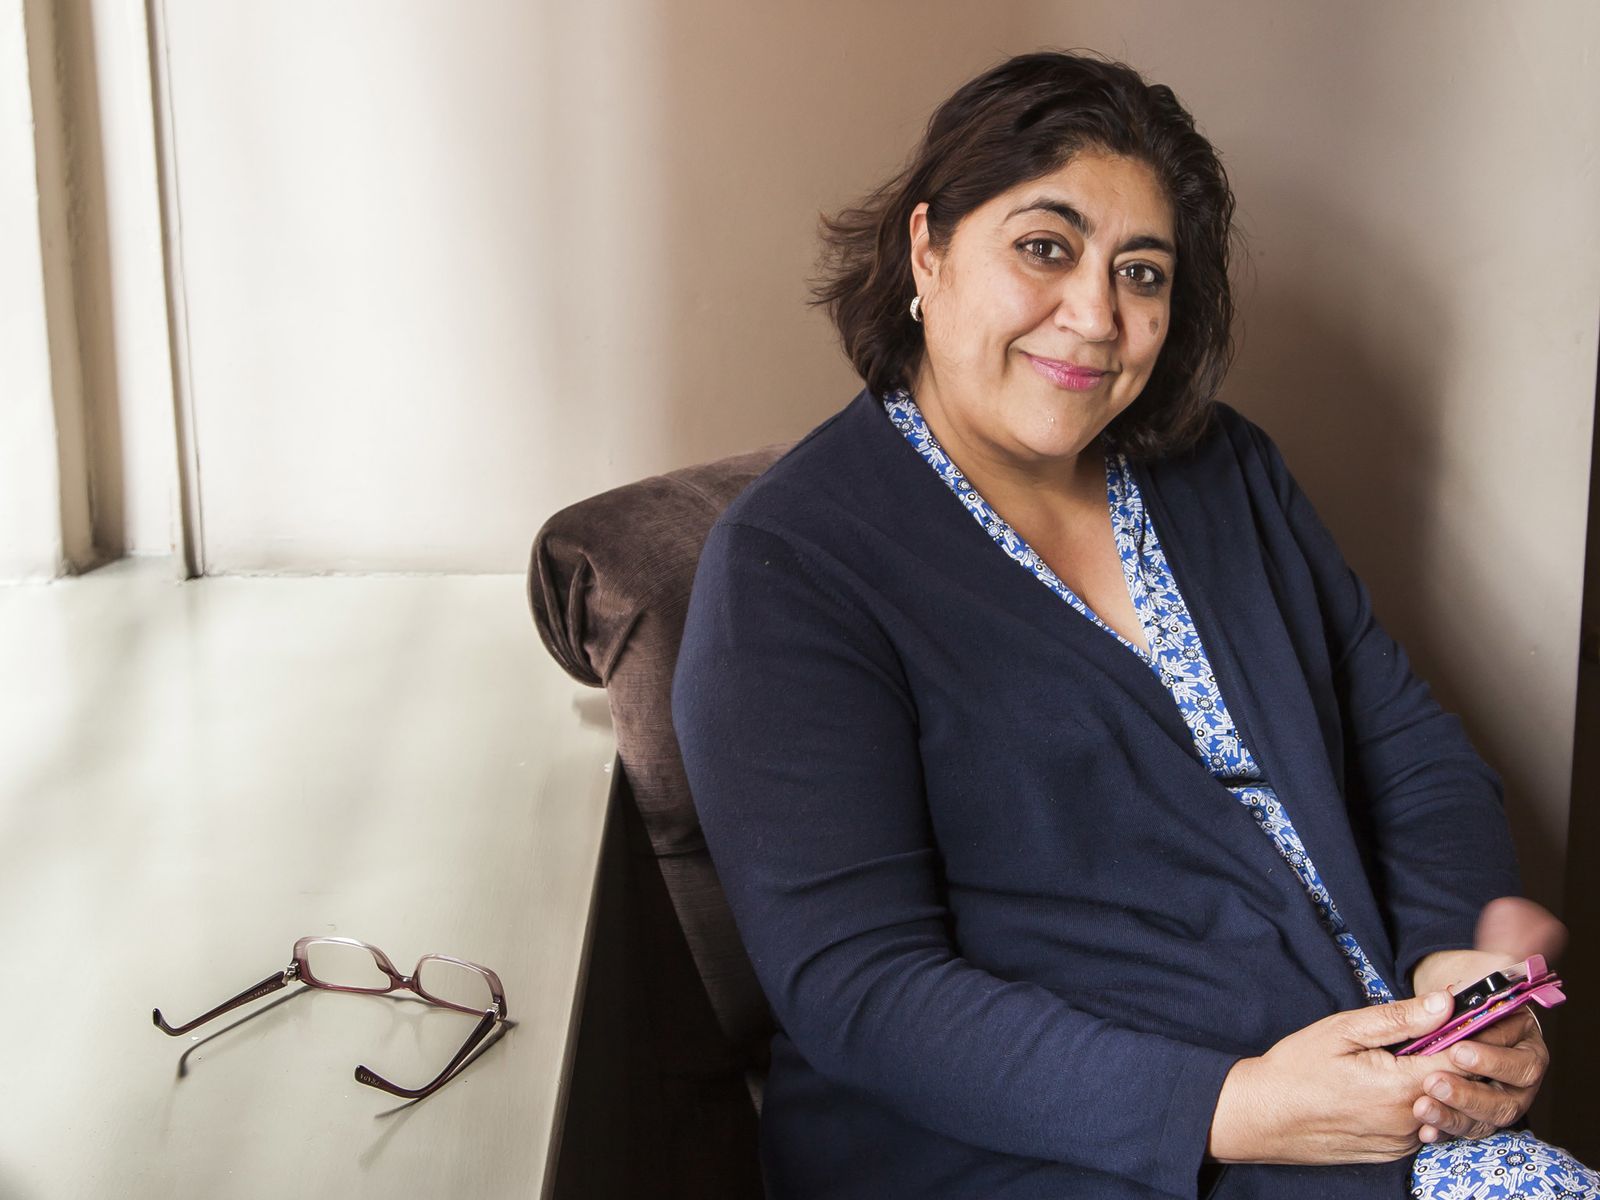 I Don’t Judge People For Whom They Pray To: Gurinder Chadha